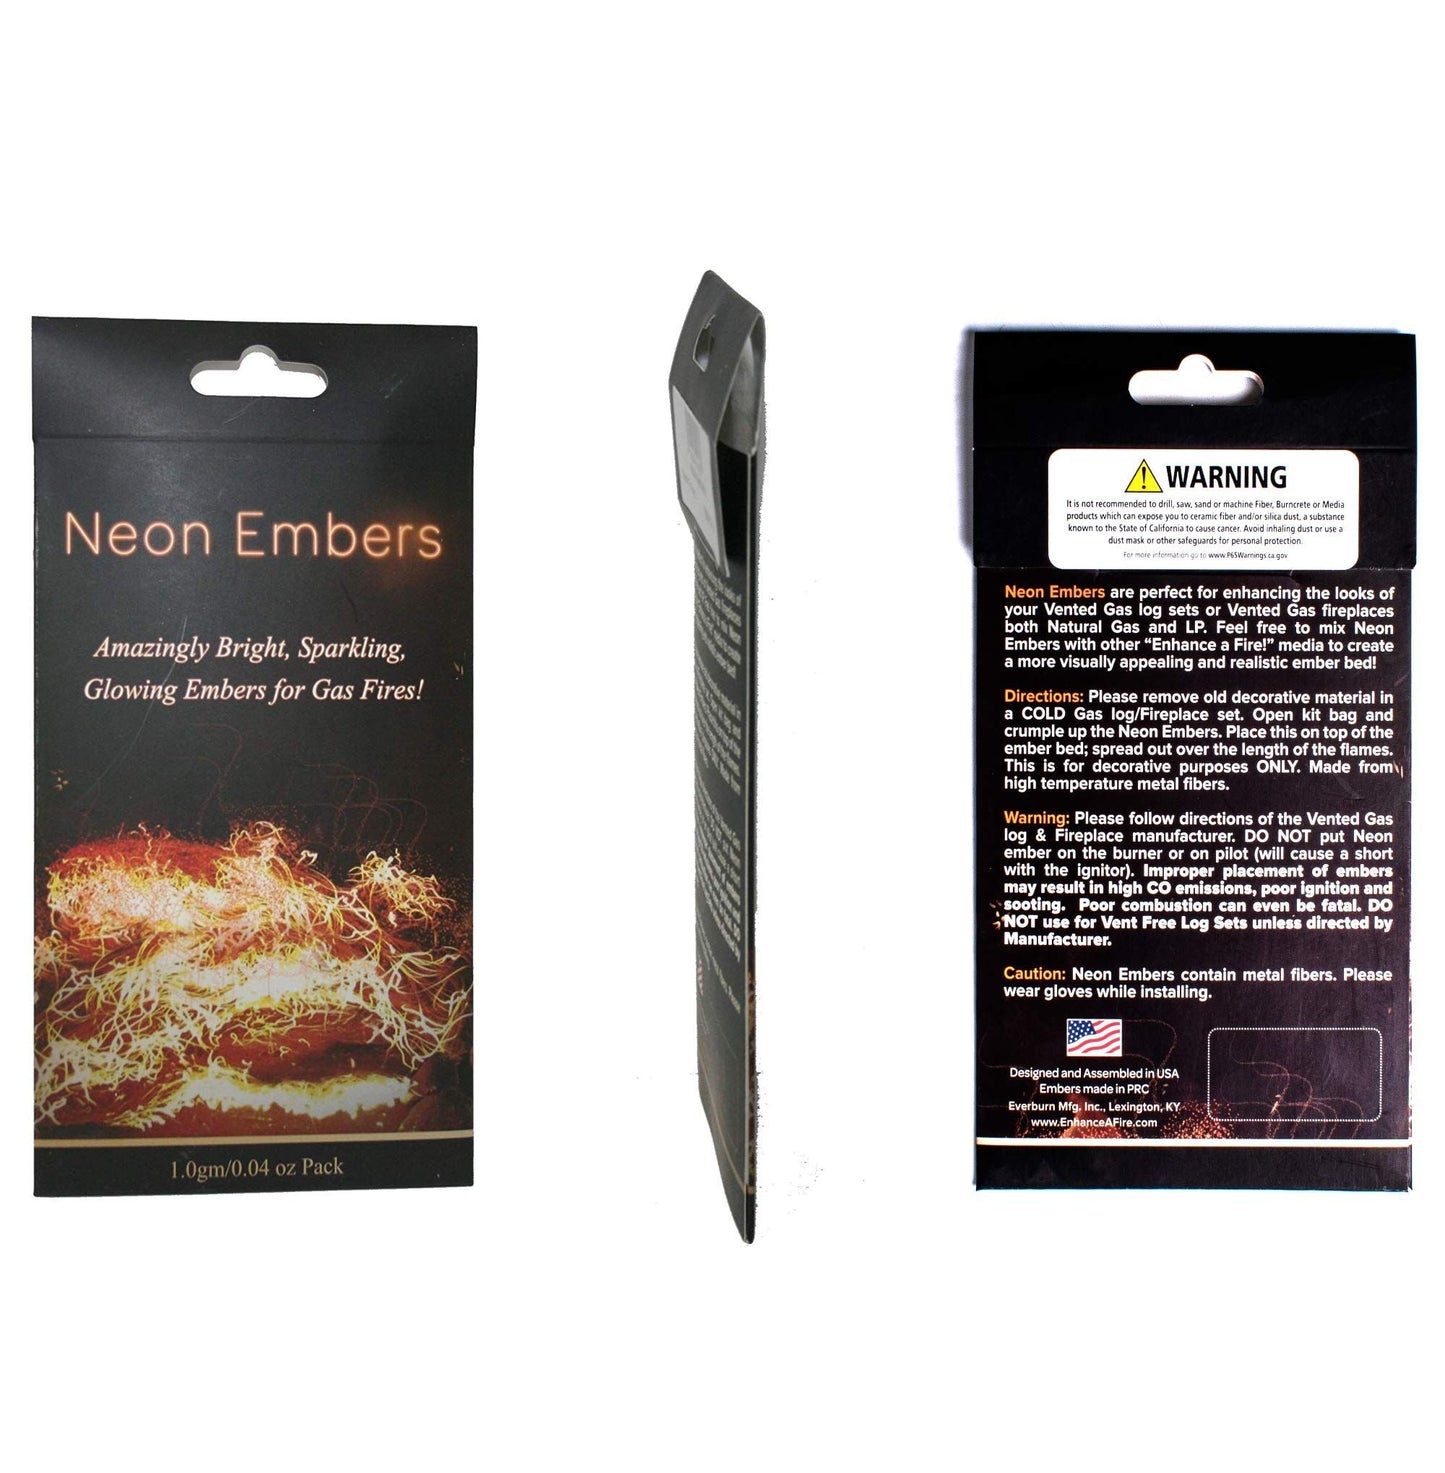 Enhance A Fire 1 Gram Neon Embers for Indoor Gas Logs and DV Gas Fireplace